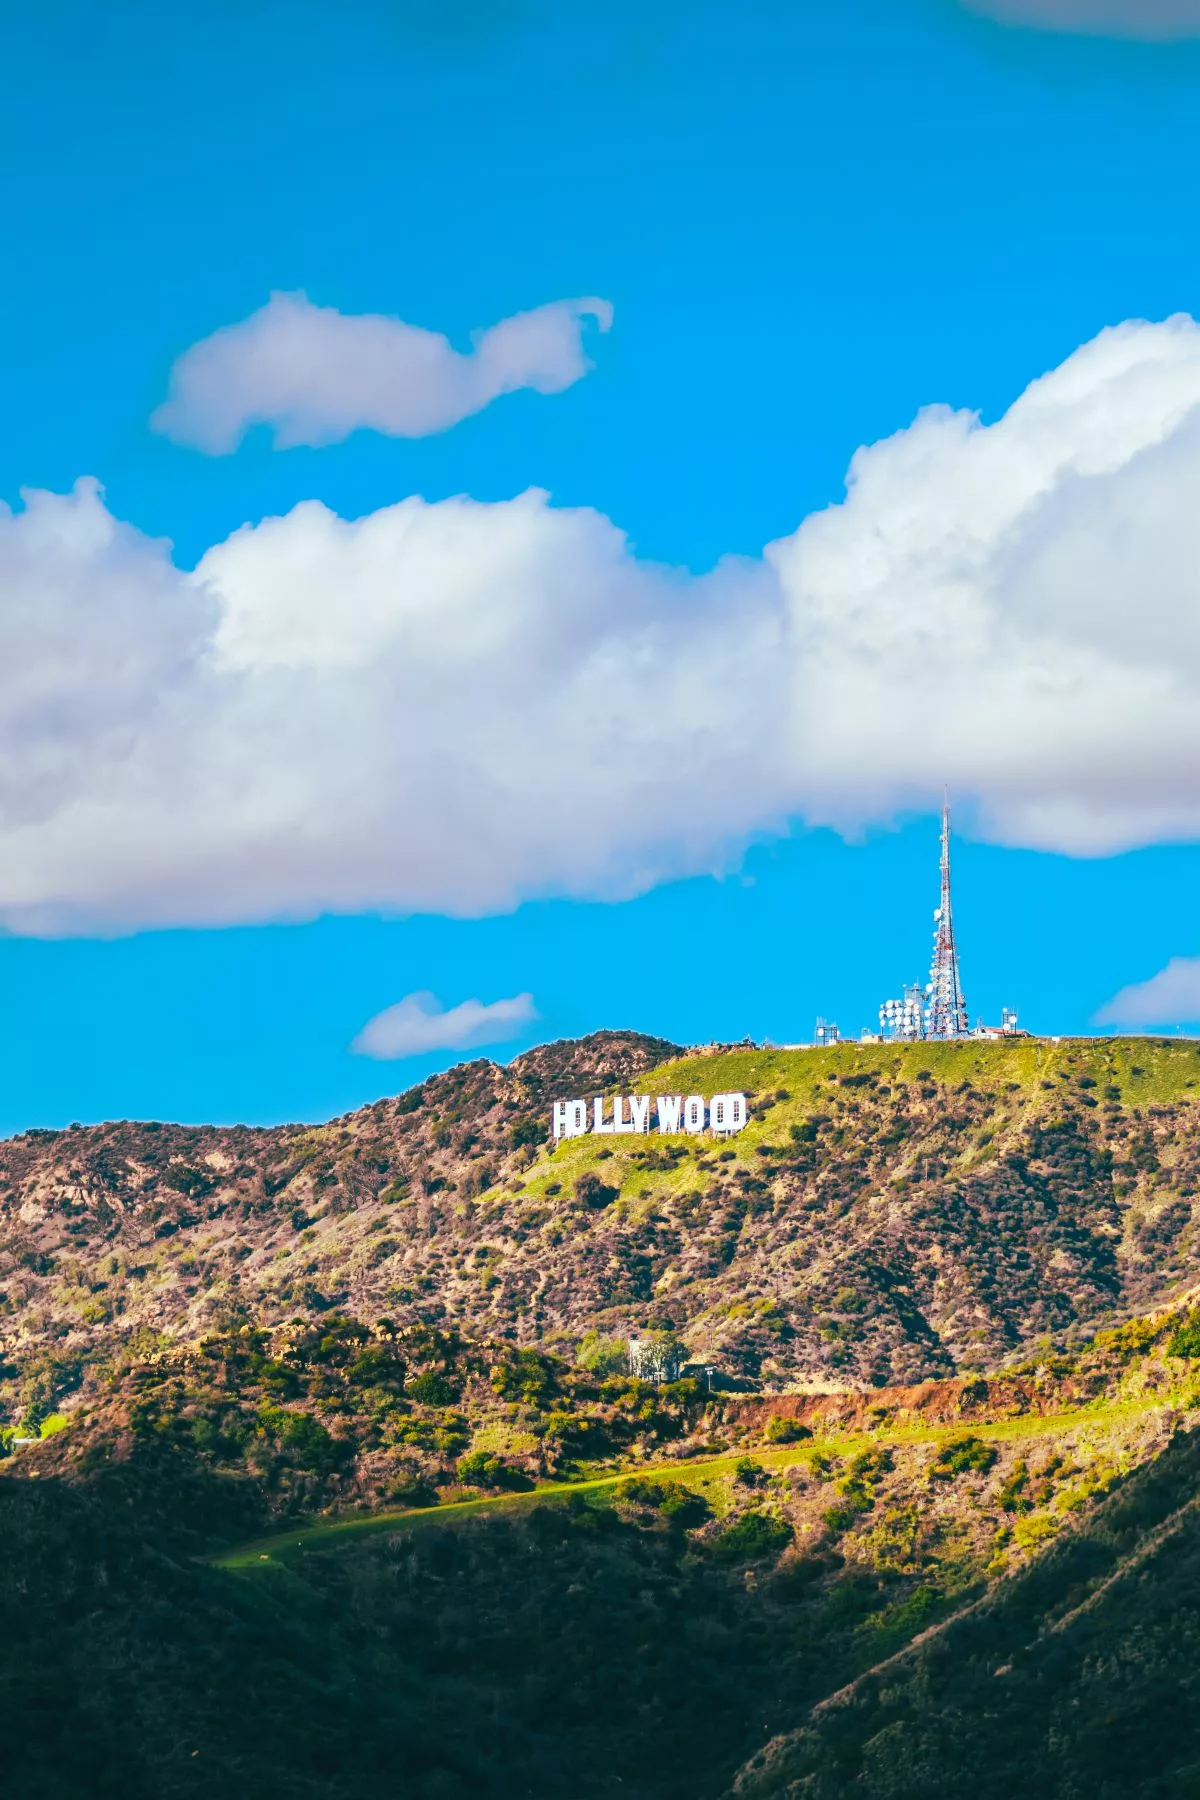 Best Views of the Hollywood Sign